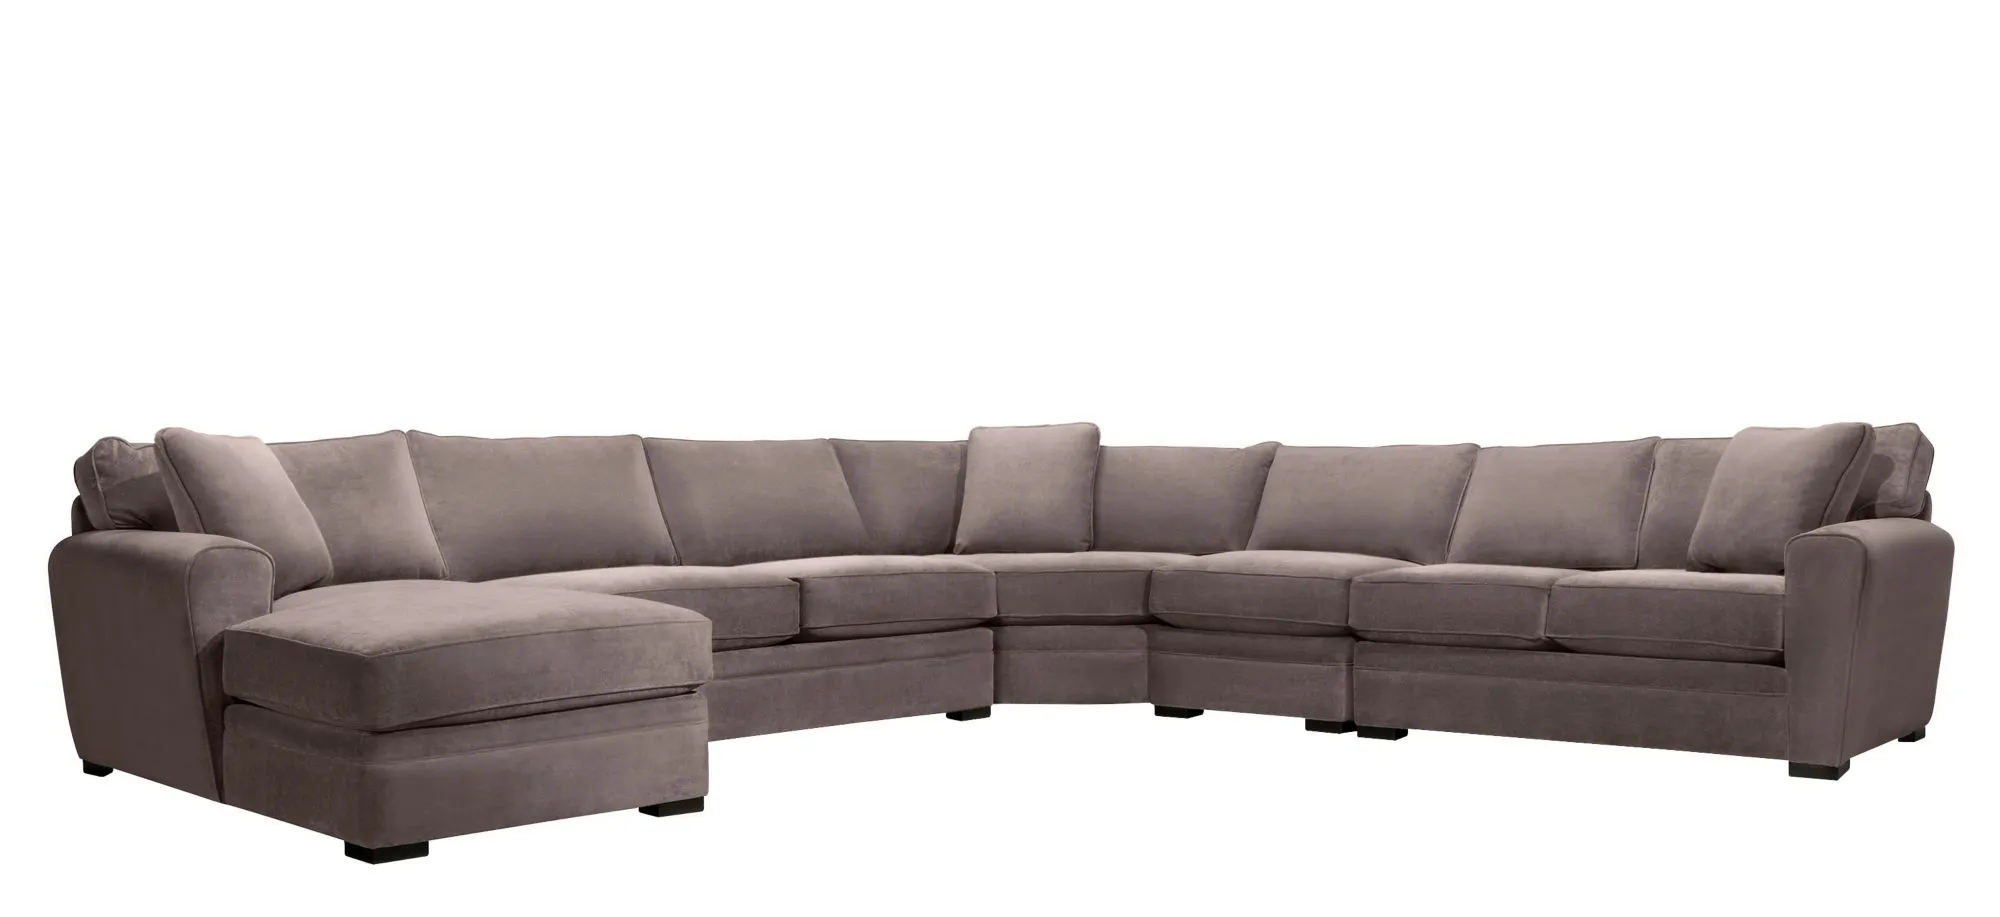 Artemis II 5-pc. Left Hand Facing Sectional Sofa in Gypsy Truffle by Jonathan Louis